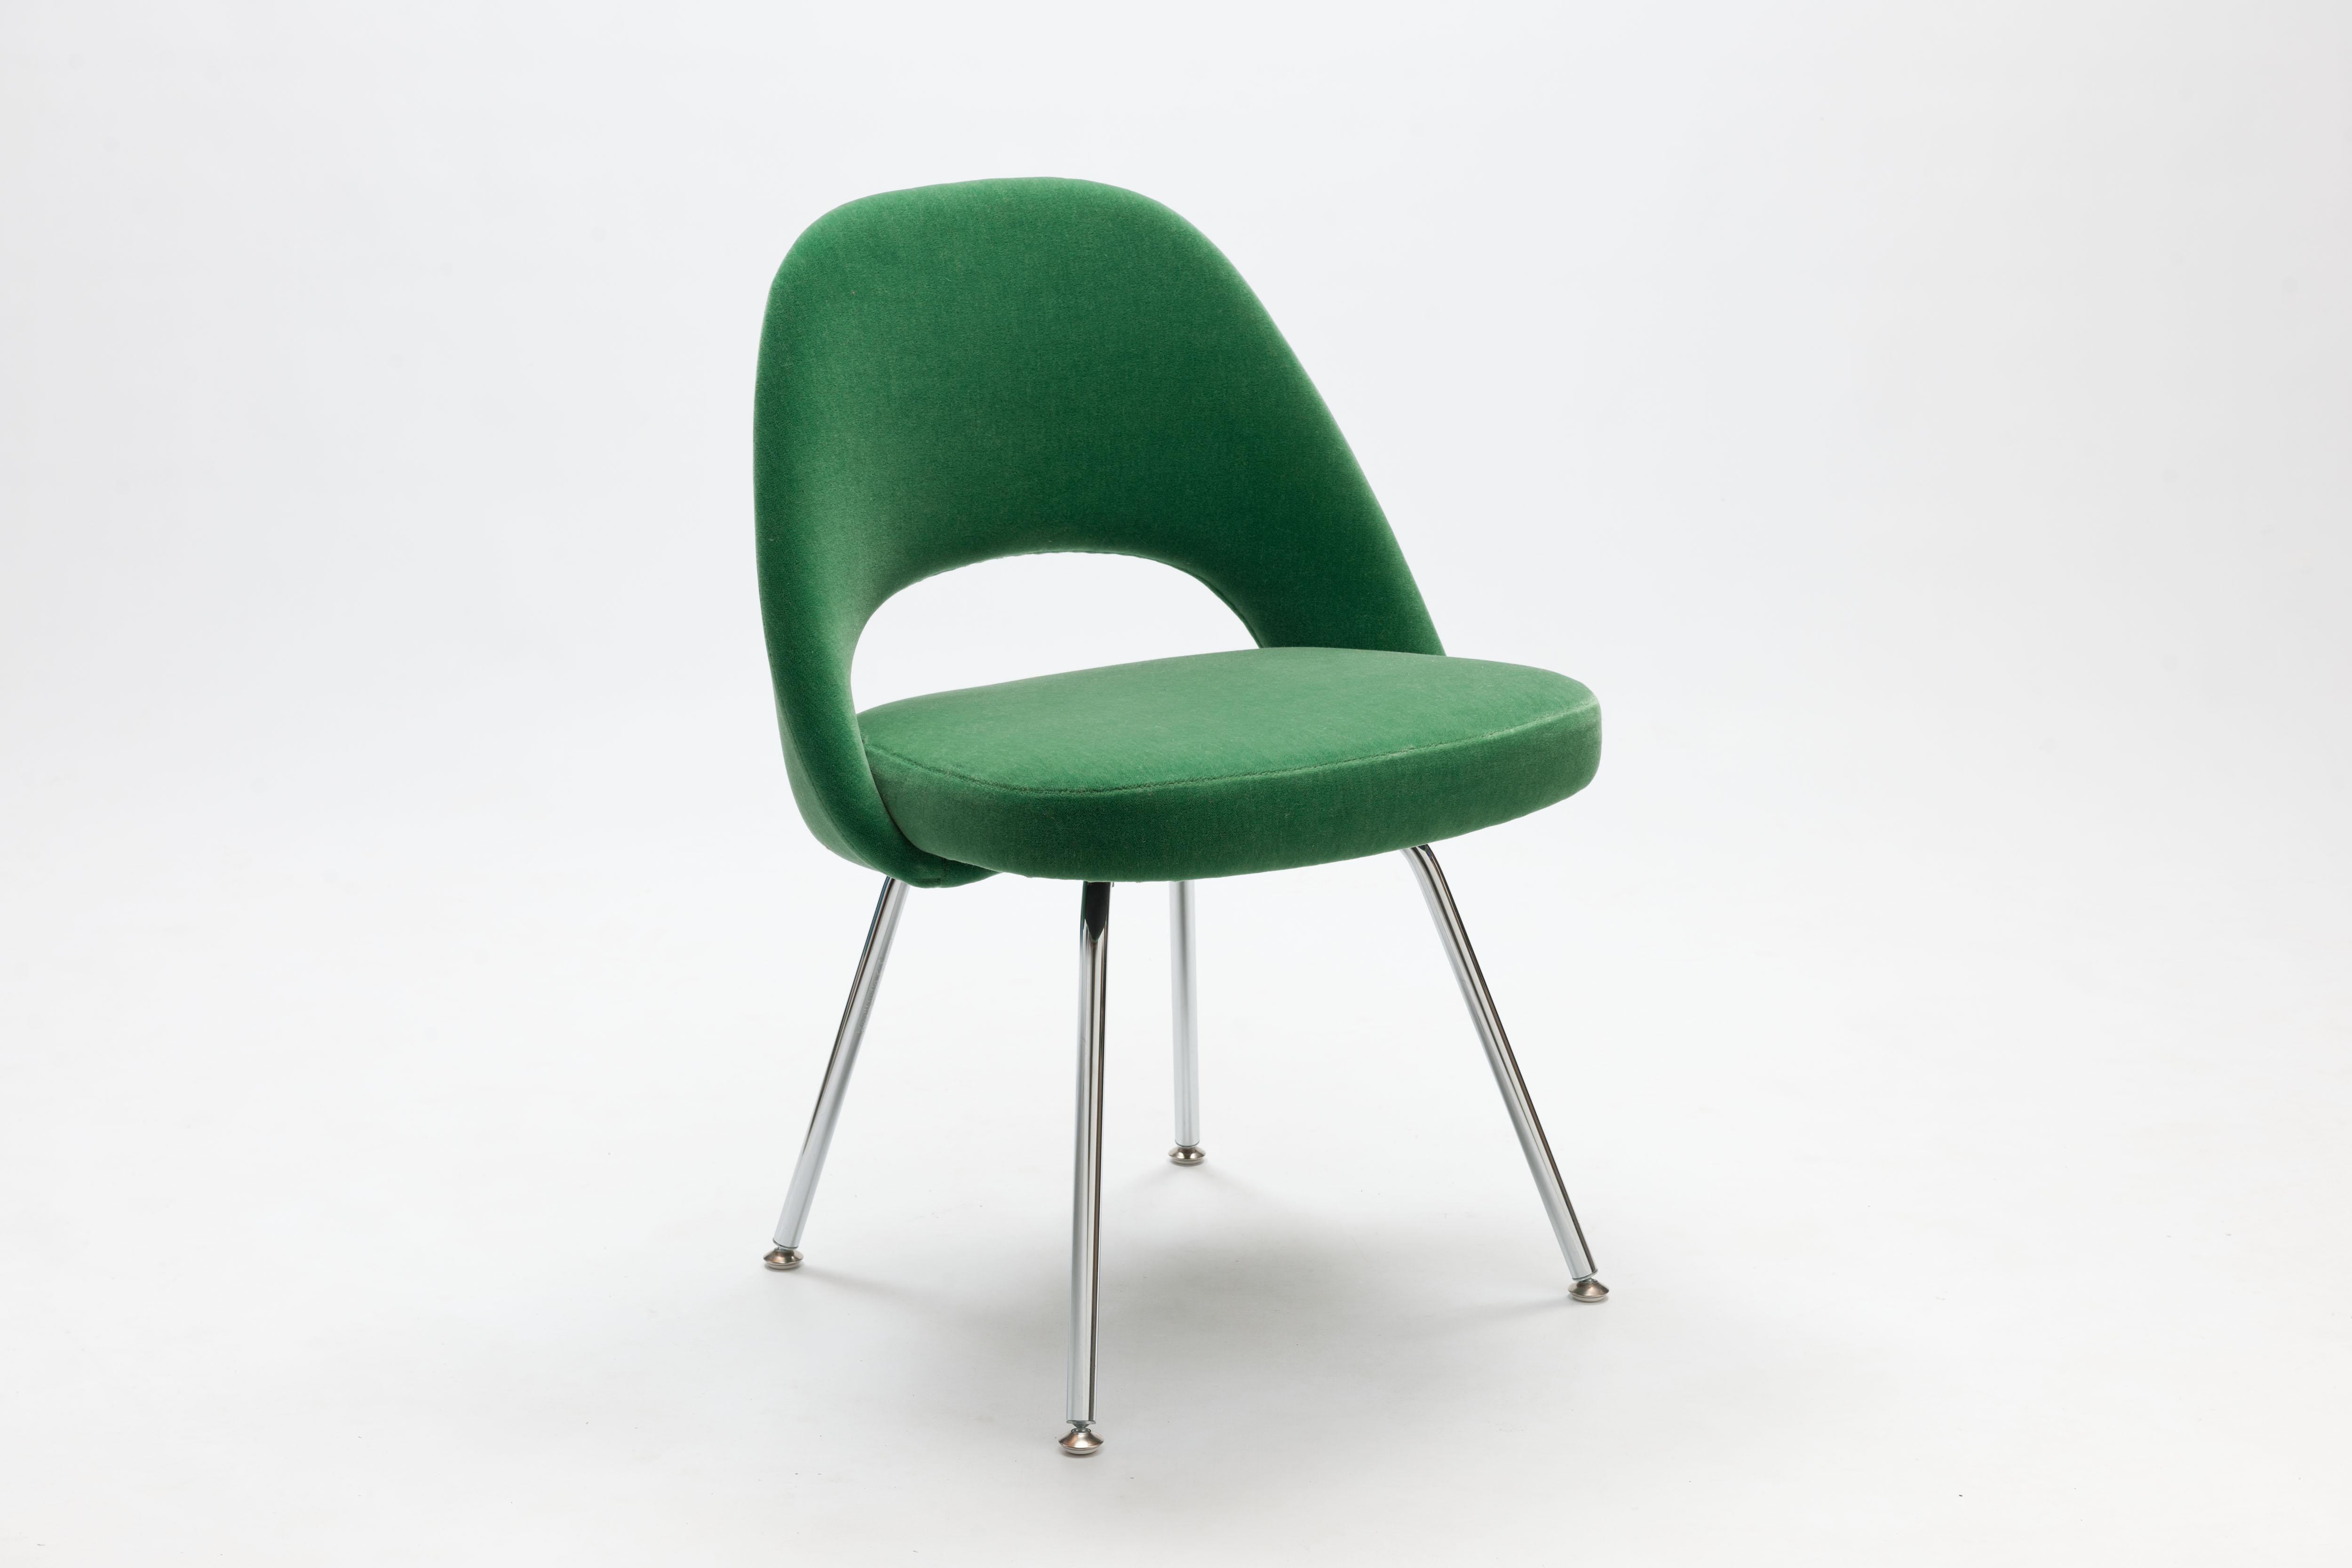 Side chair model 72 / Executive chair by Eero Saarinen with chromed steel legs and beautiful Mohair Fabric. This versatile chair works well in various settings and decors and provides extreme good seating comfort. 

Complimentary shipping within the